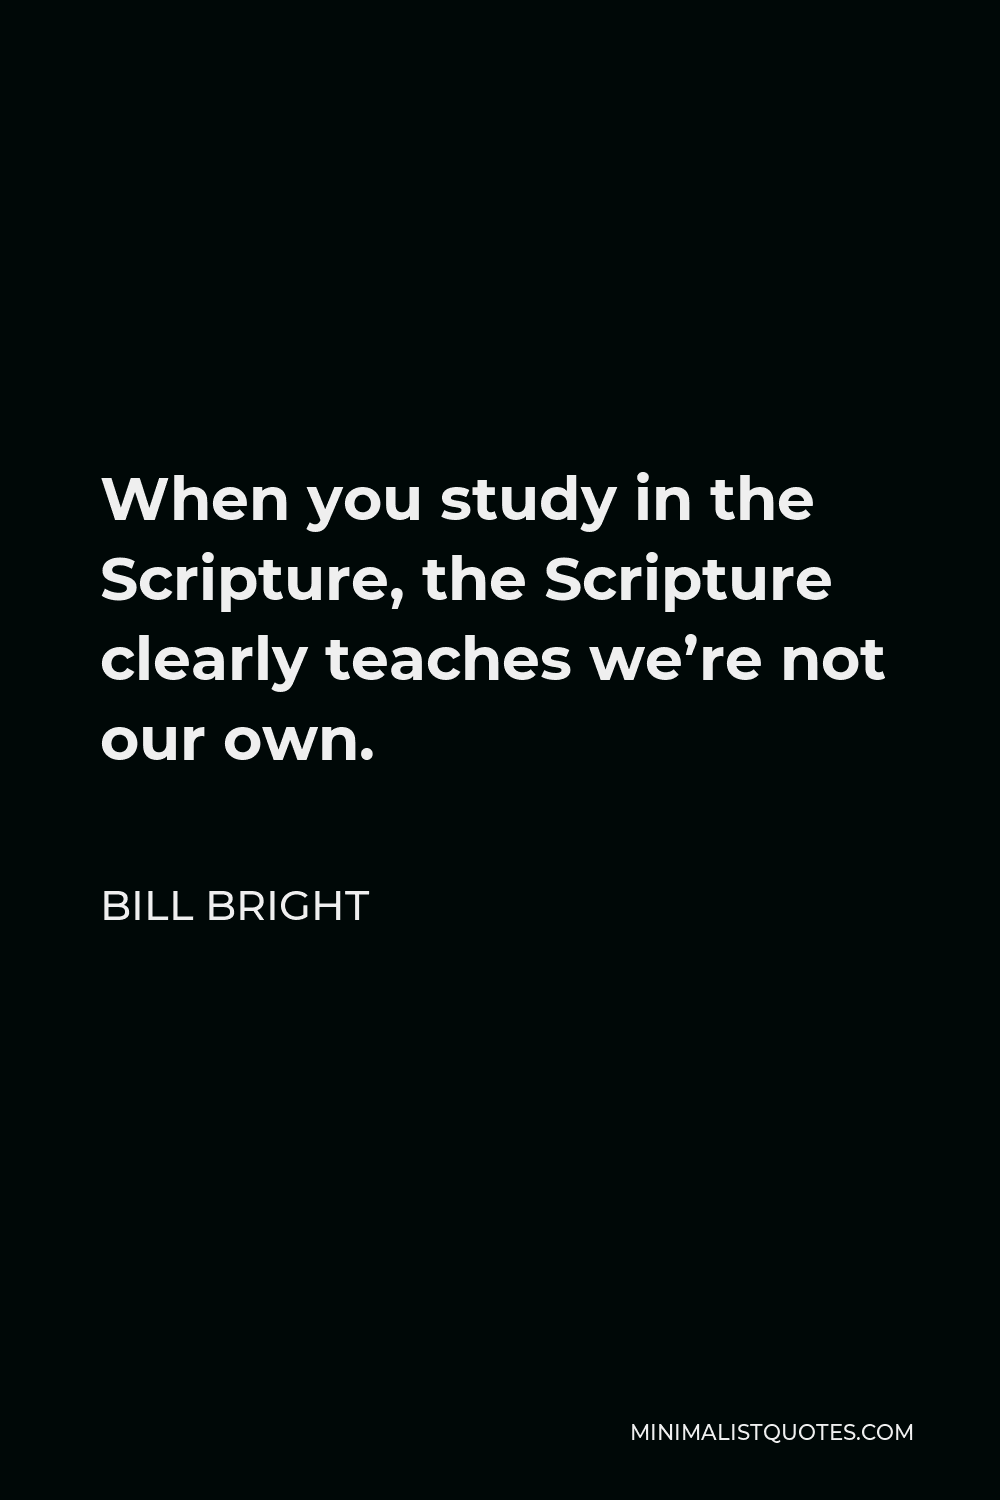 Bill Bright Quote - When you study in the Scripture, the Scripture clearly teaches we’re not our own.